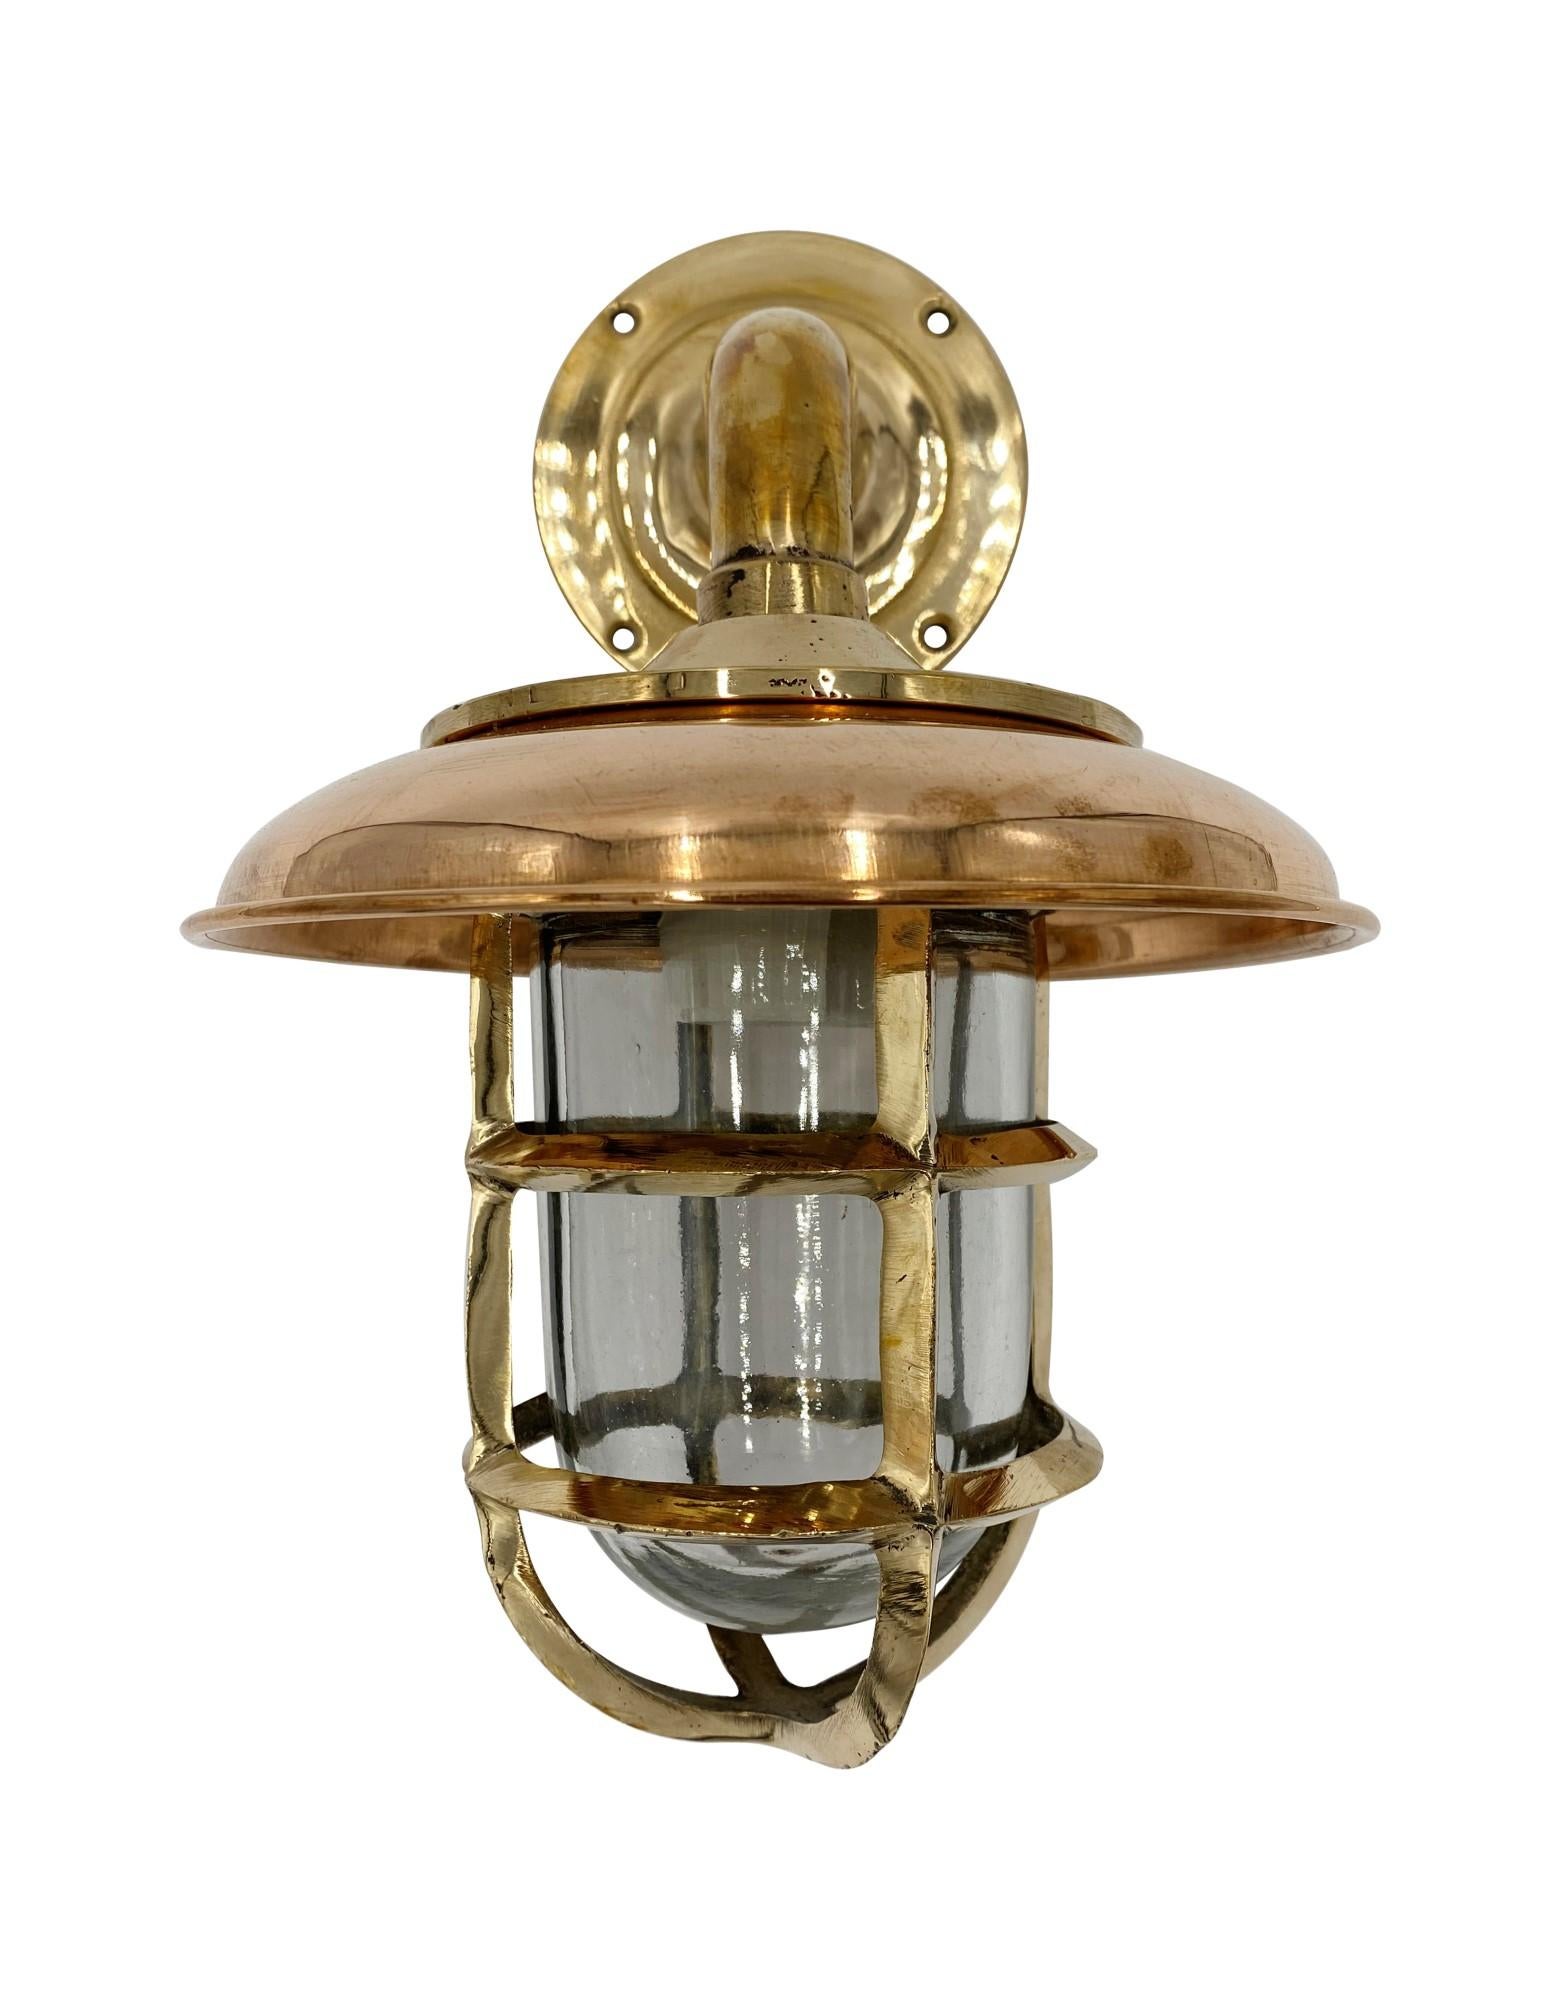 Solid brass 90 degree nautical sconce. Comes with a removable cooper rain shield cover and a glass globe. Takes one standard household light bulb. Small quantity available at time of posting. Please inquire. Priced each. Please note, this item is